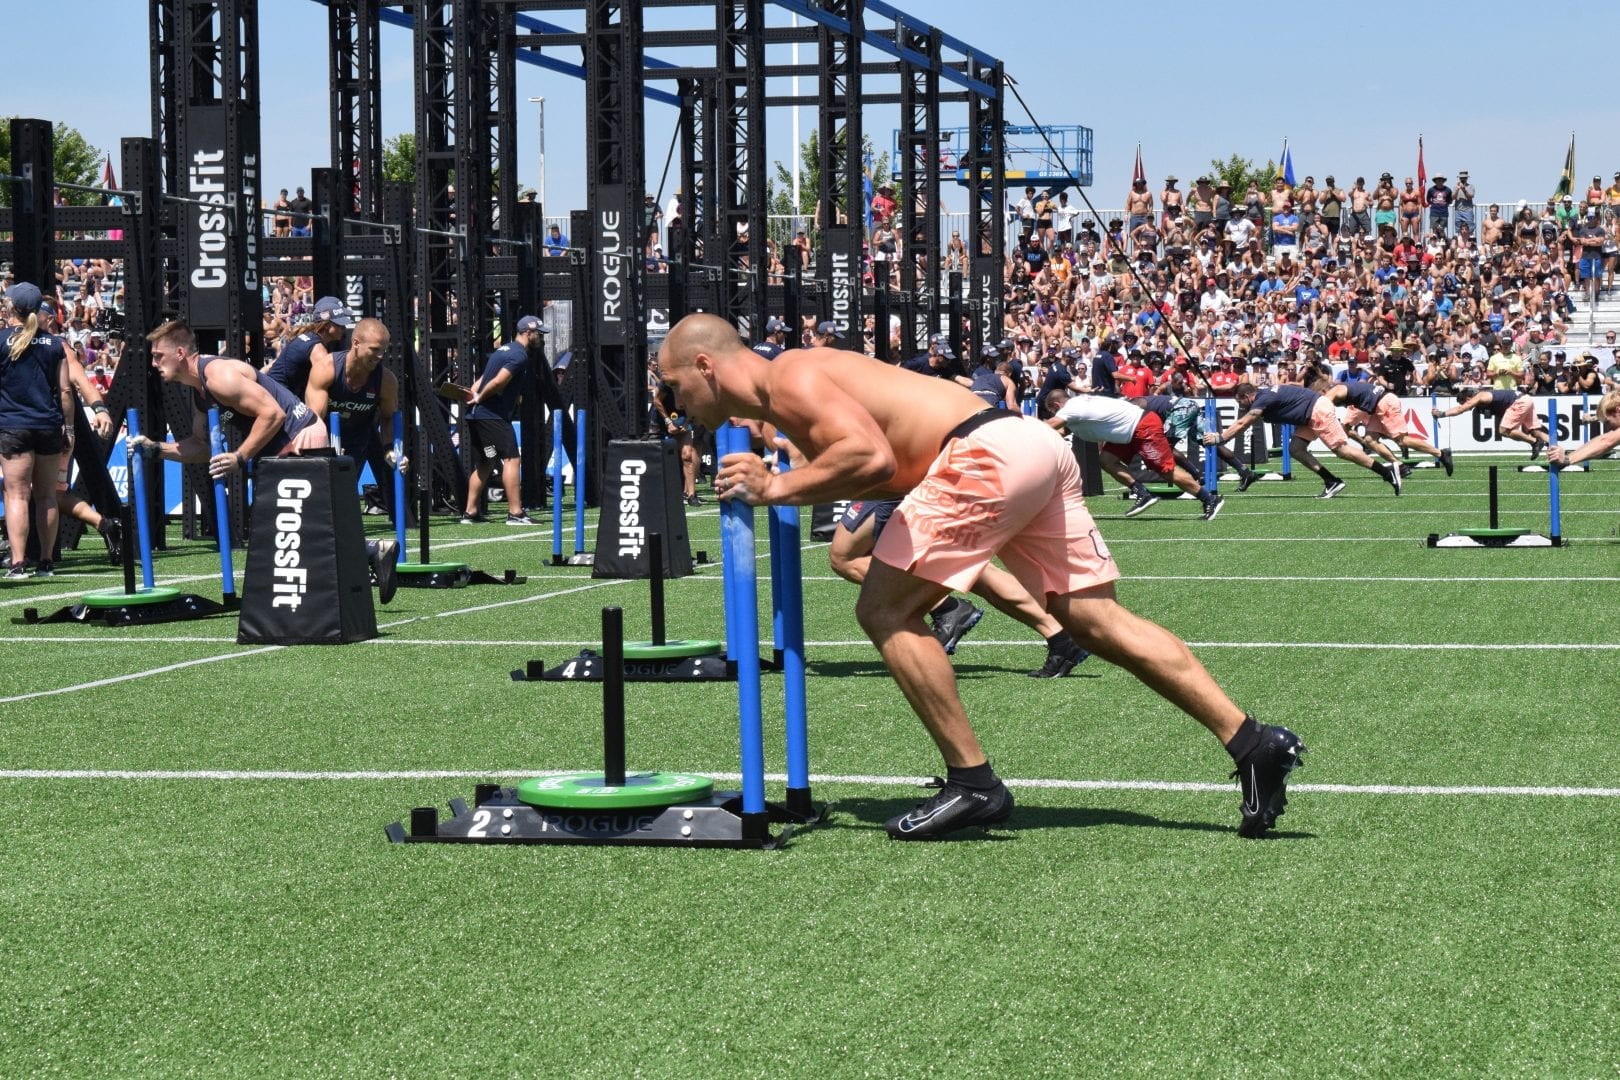 Cole Sager completes the Sprint Bicouplet event at the 2019 CrossFit Games